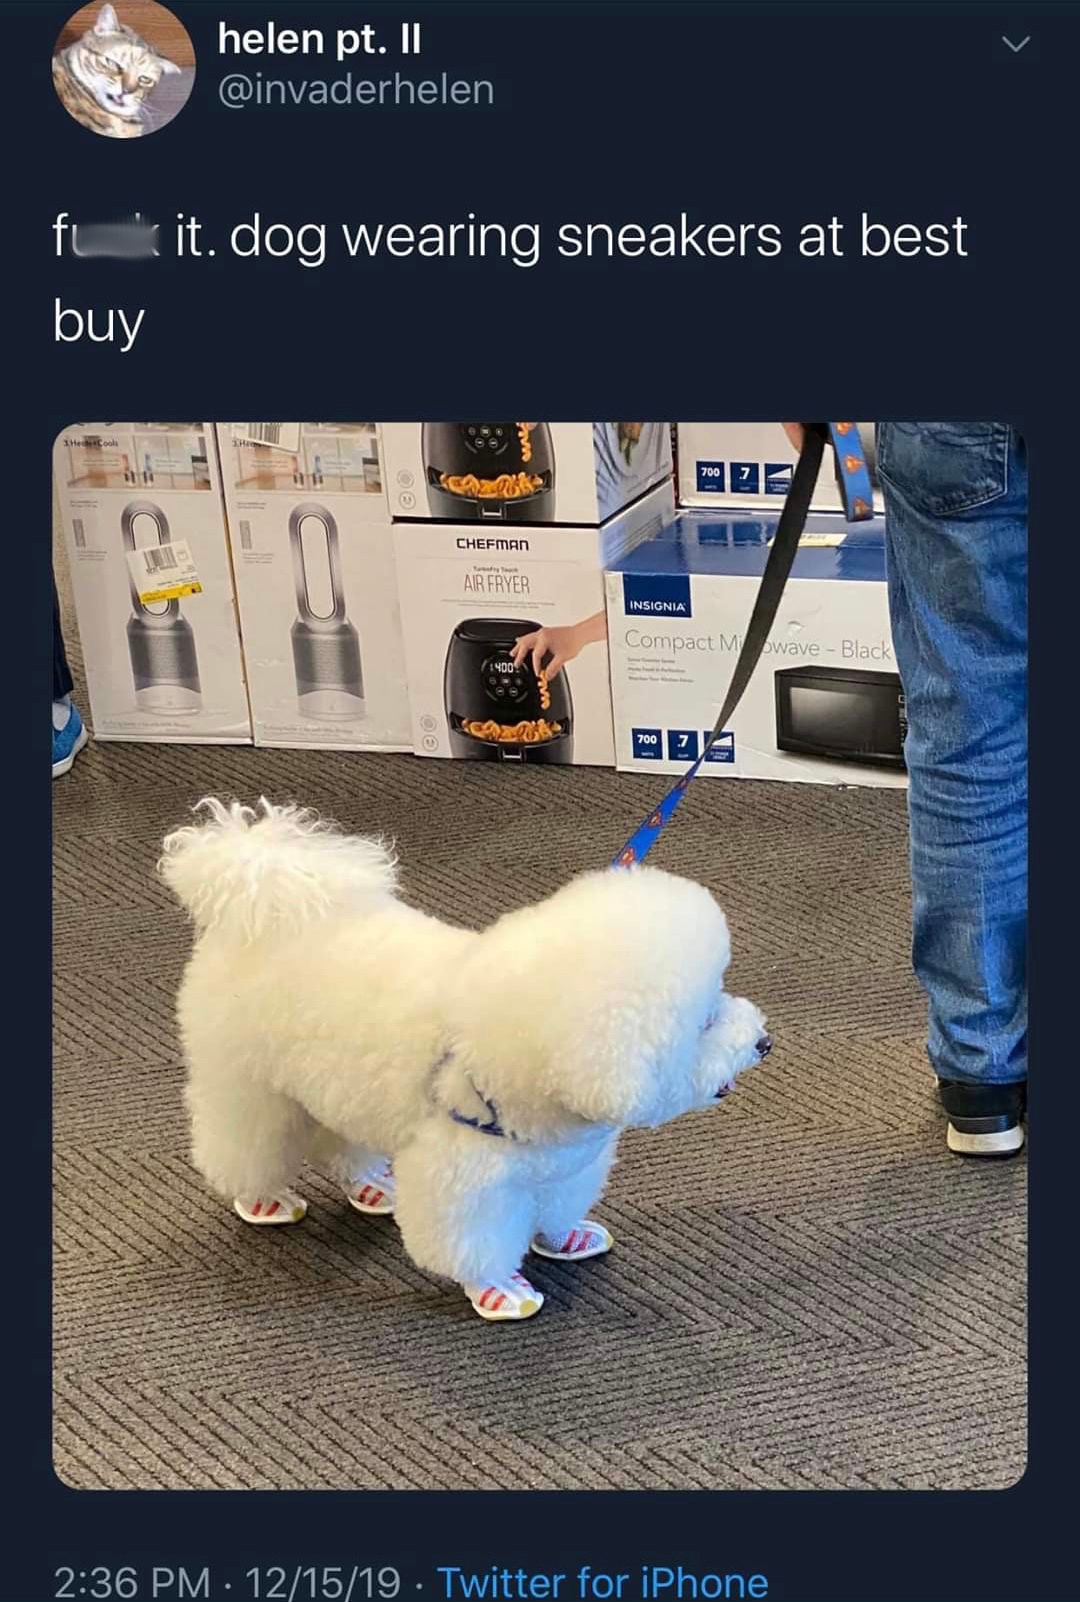 photo caption - helen pt. Il fuit. dog wearing sneakers at best buy 121519. Twitter for iPhone